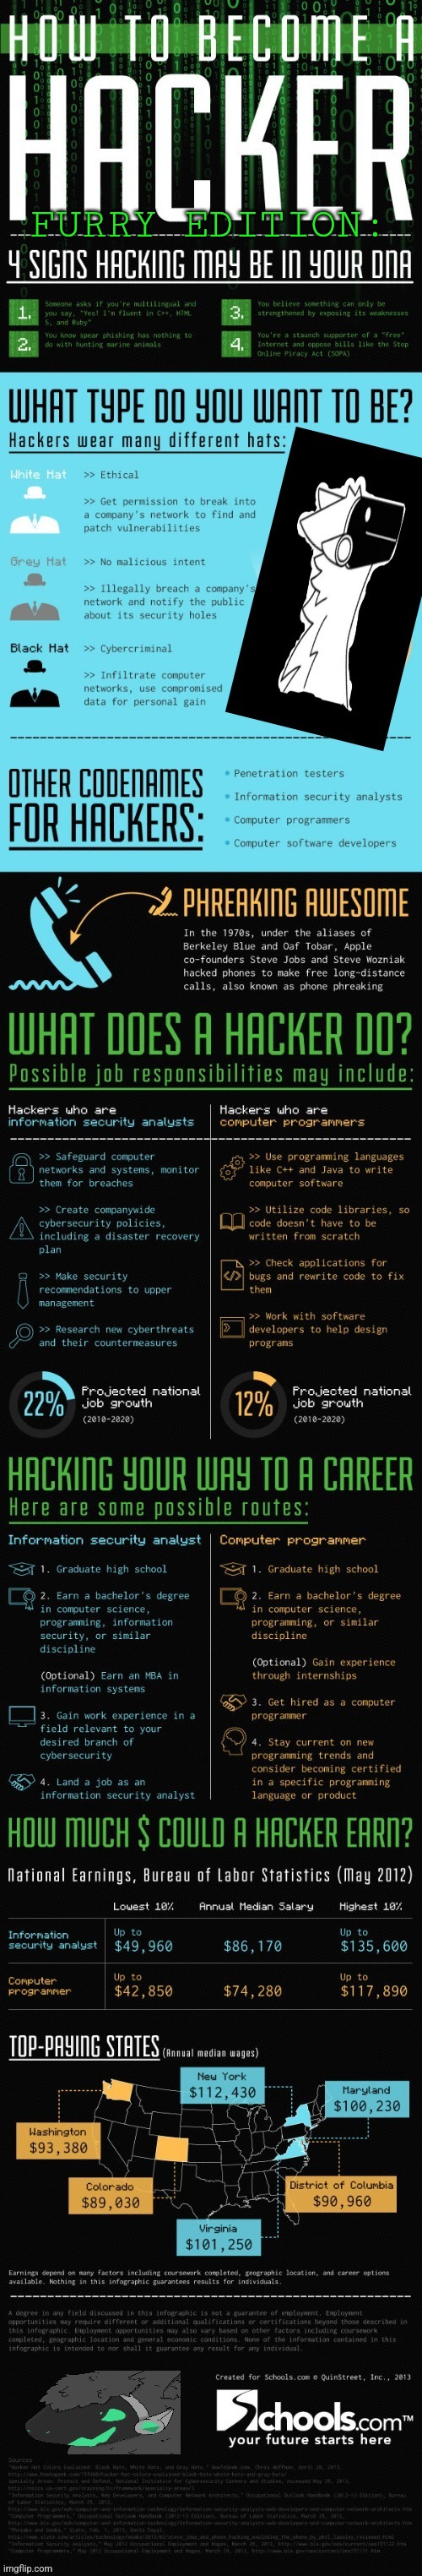 HOW TO BECOME A HACKER: Furry Edition (By SimoTheFinlandized - 2022 CE [credits to Schools.com]) | FURRY EDITION: | image tagged in simothefinlandized,computer-programming,infographic,furry,hacker | made w/ Imgflip meme maker